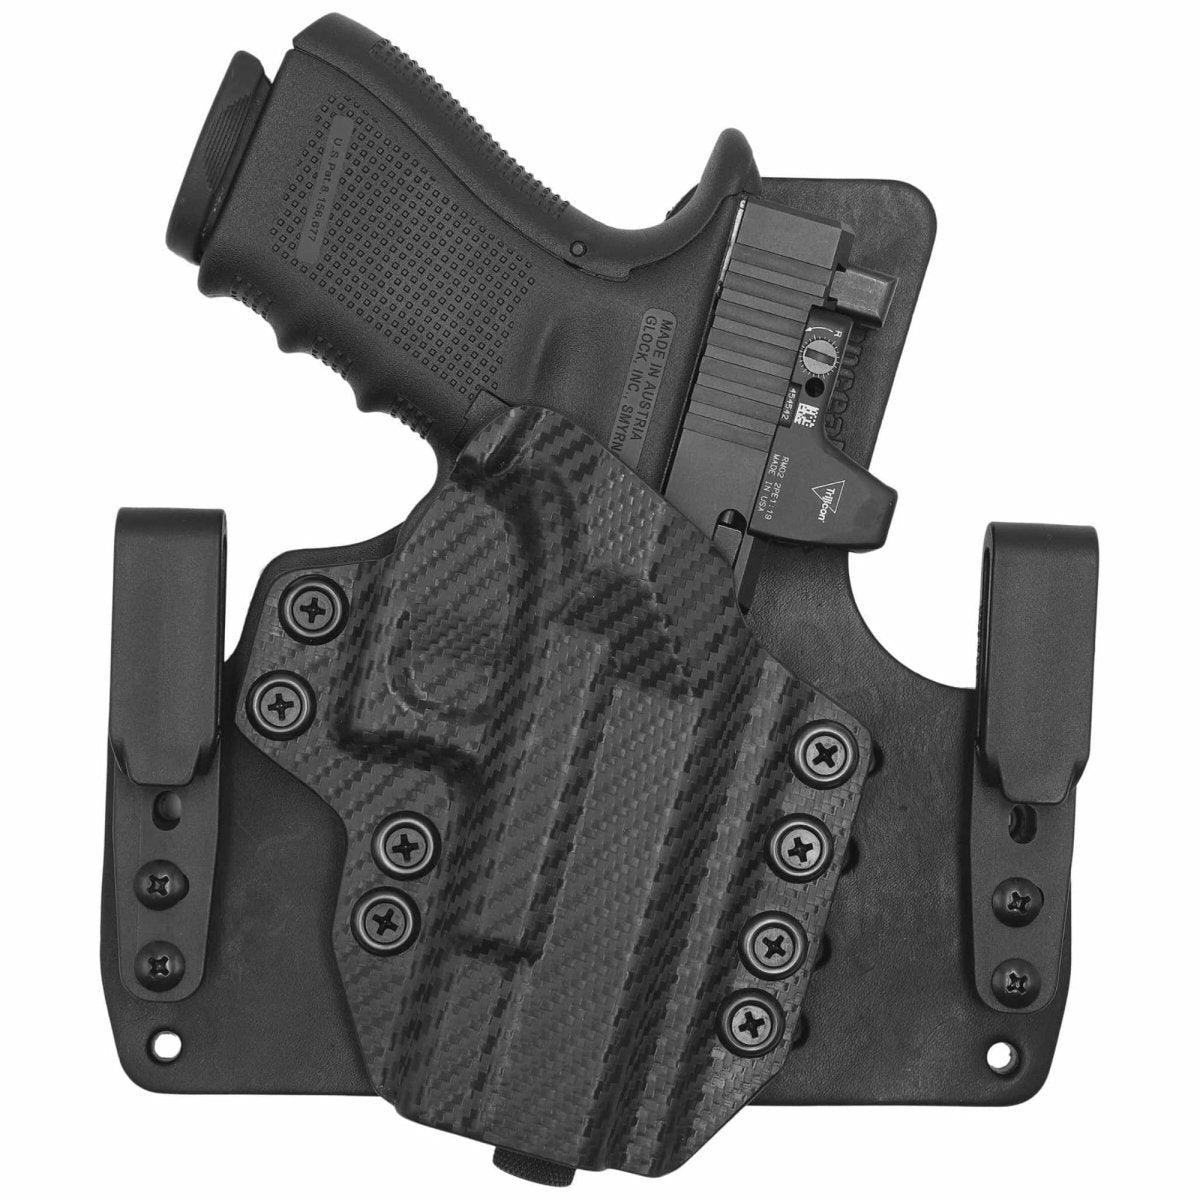 Wide KYDEX Leather Hybrid Holsters